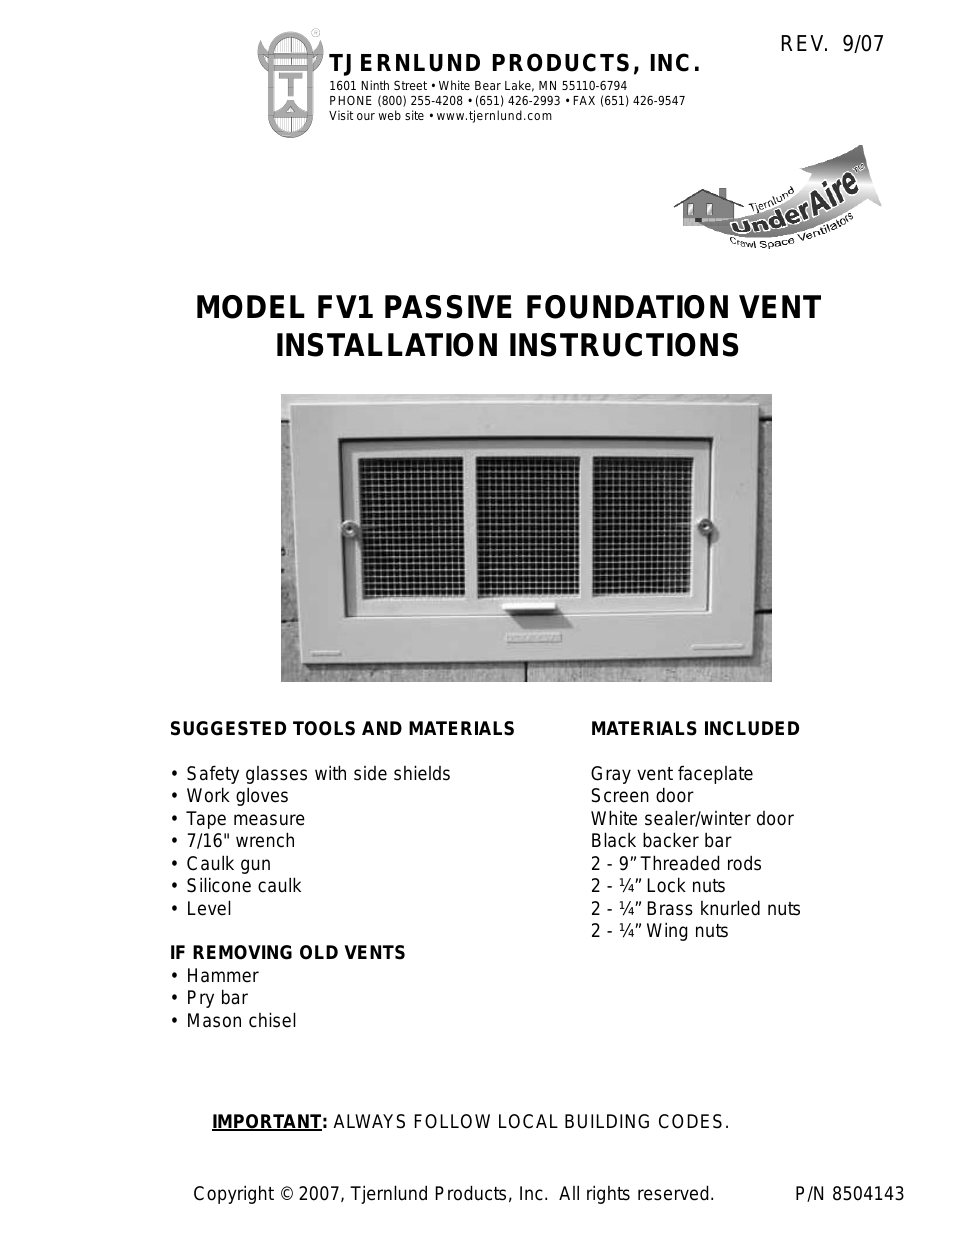 FV1 Crawl Space Vent 8504143 (Page 1)